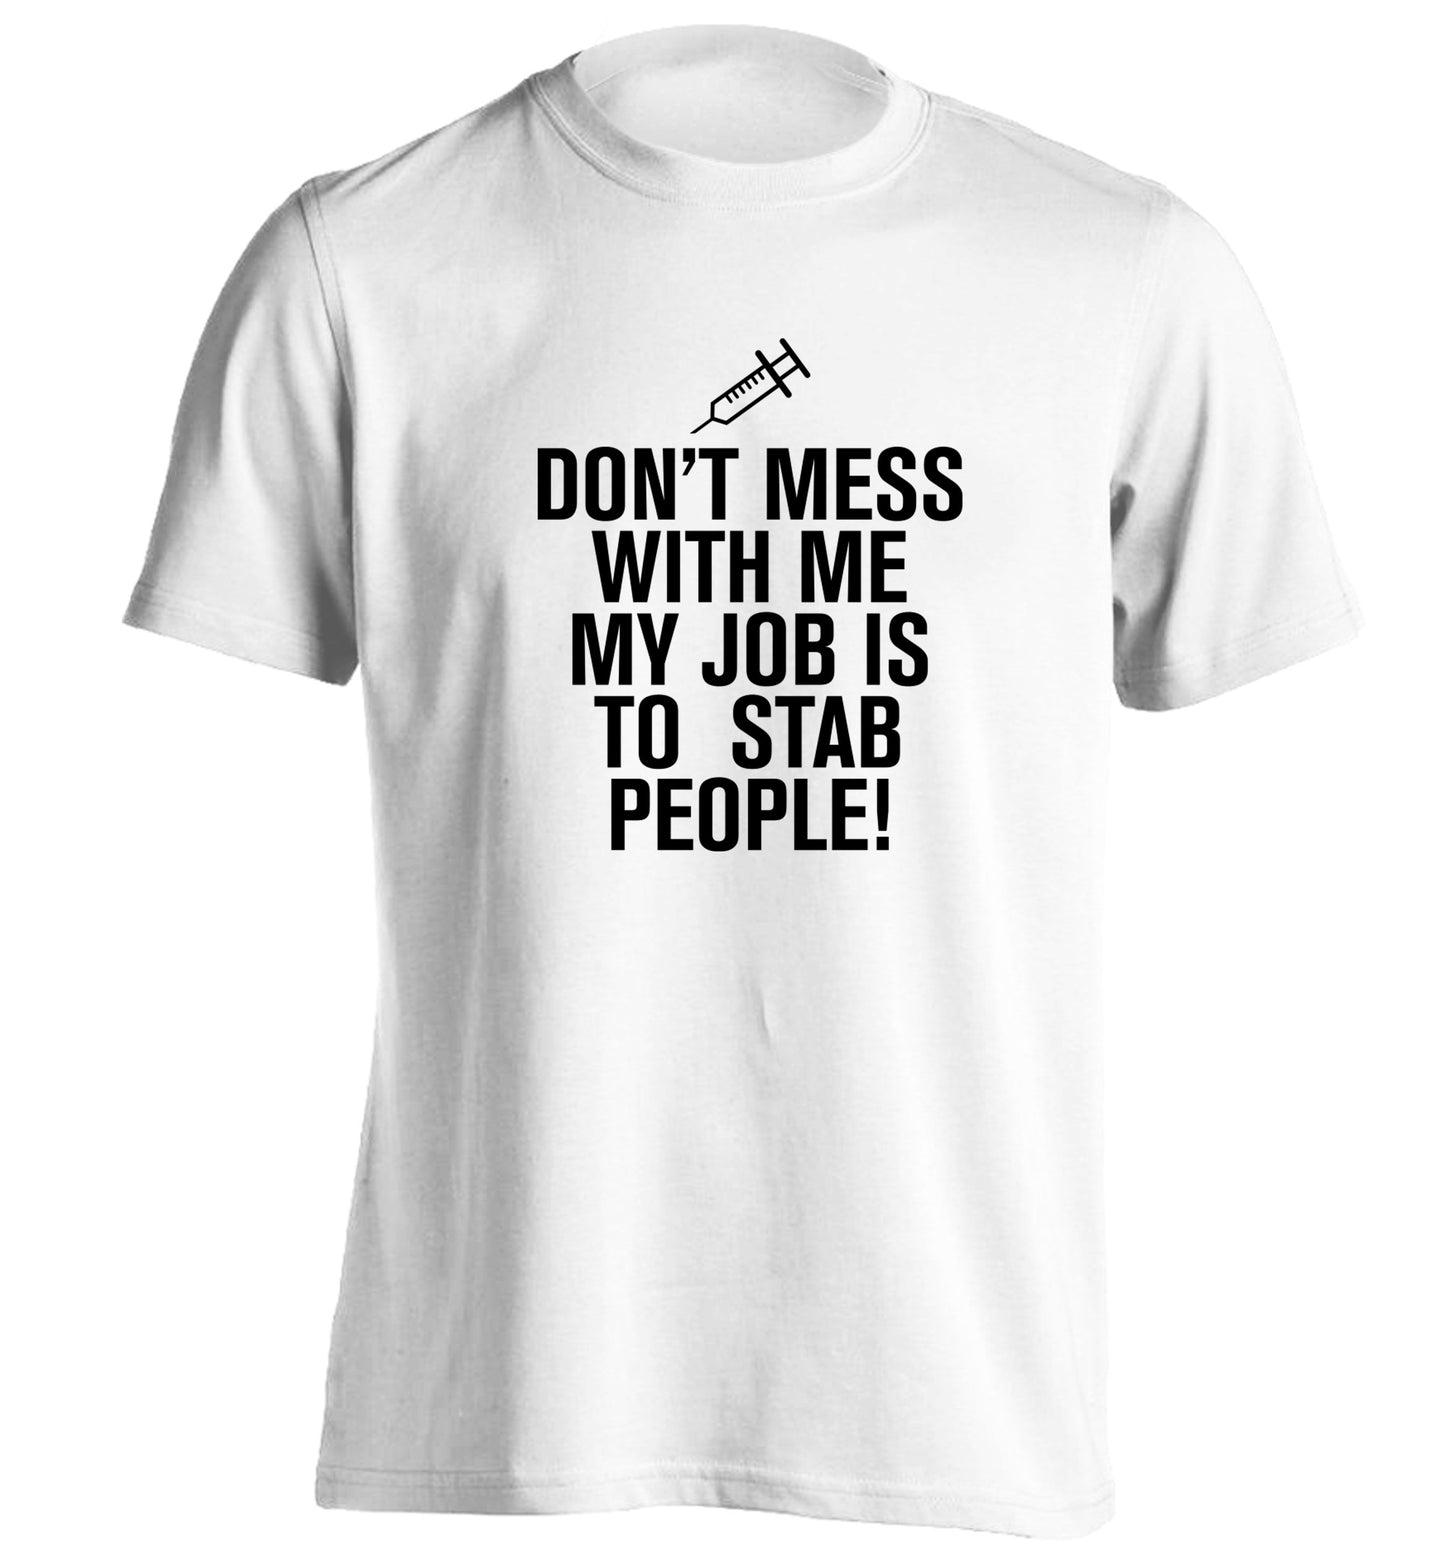 Don't mess with me my job is to stab people! adults unisex white Tshirt 2XL